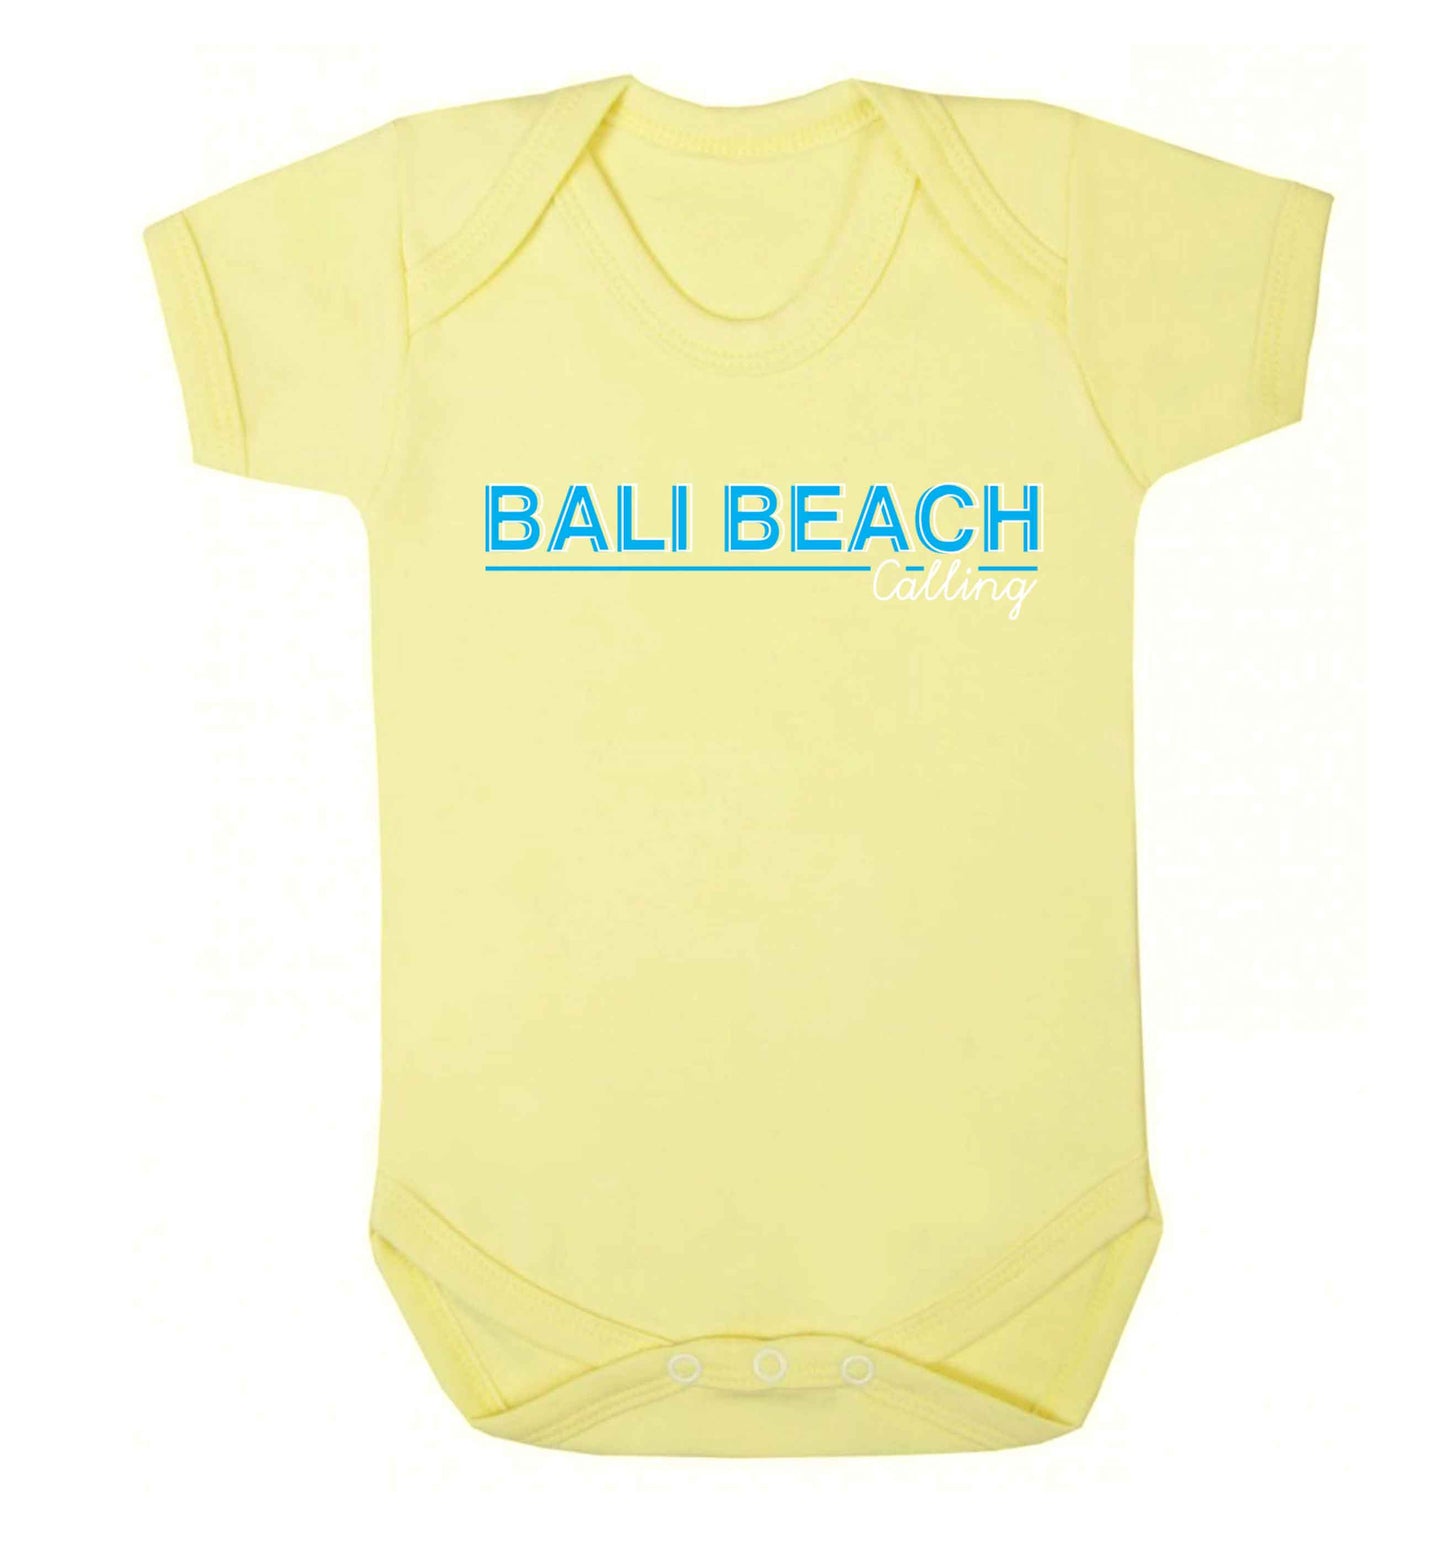 Bali beach calling Baby Vest pale yellow 18-24 months